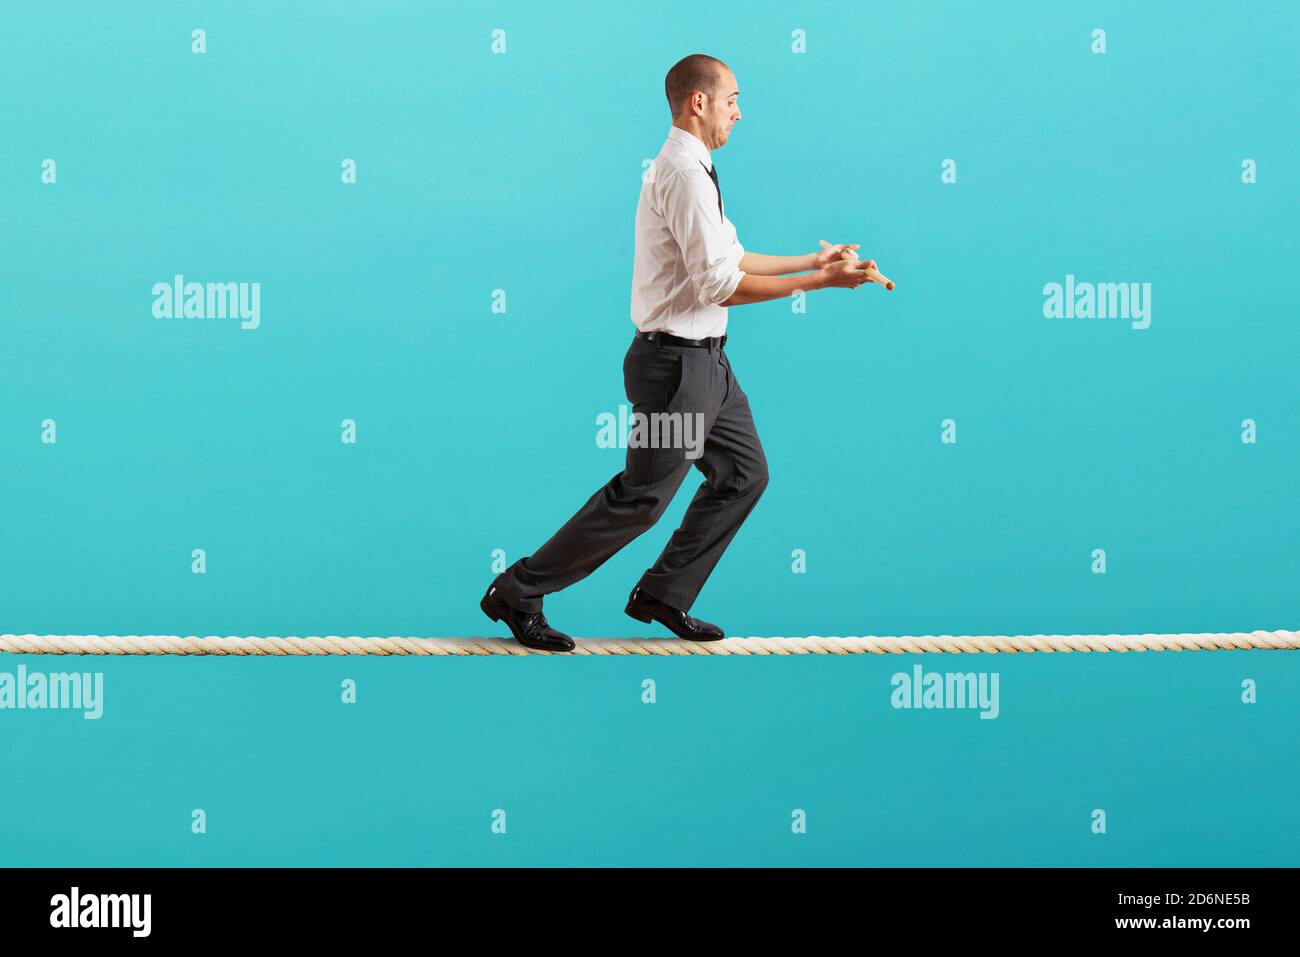 Worry man in balance walking on a rope Stock Photo